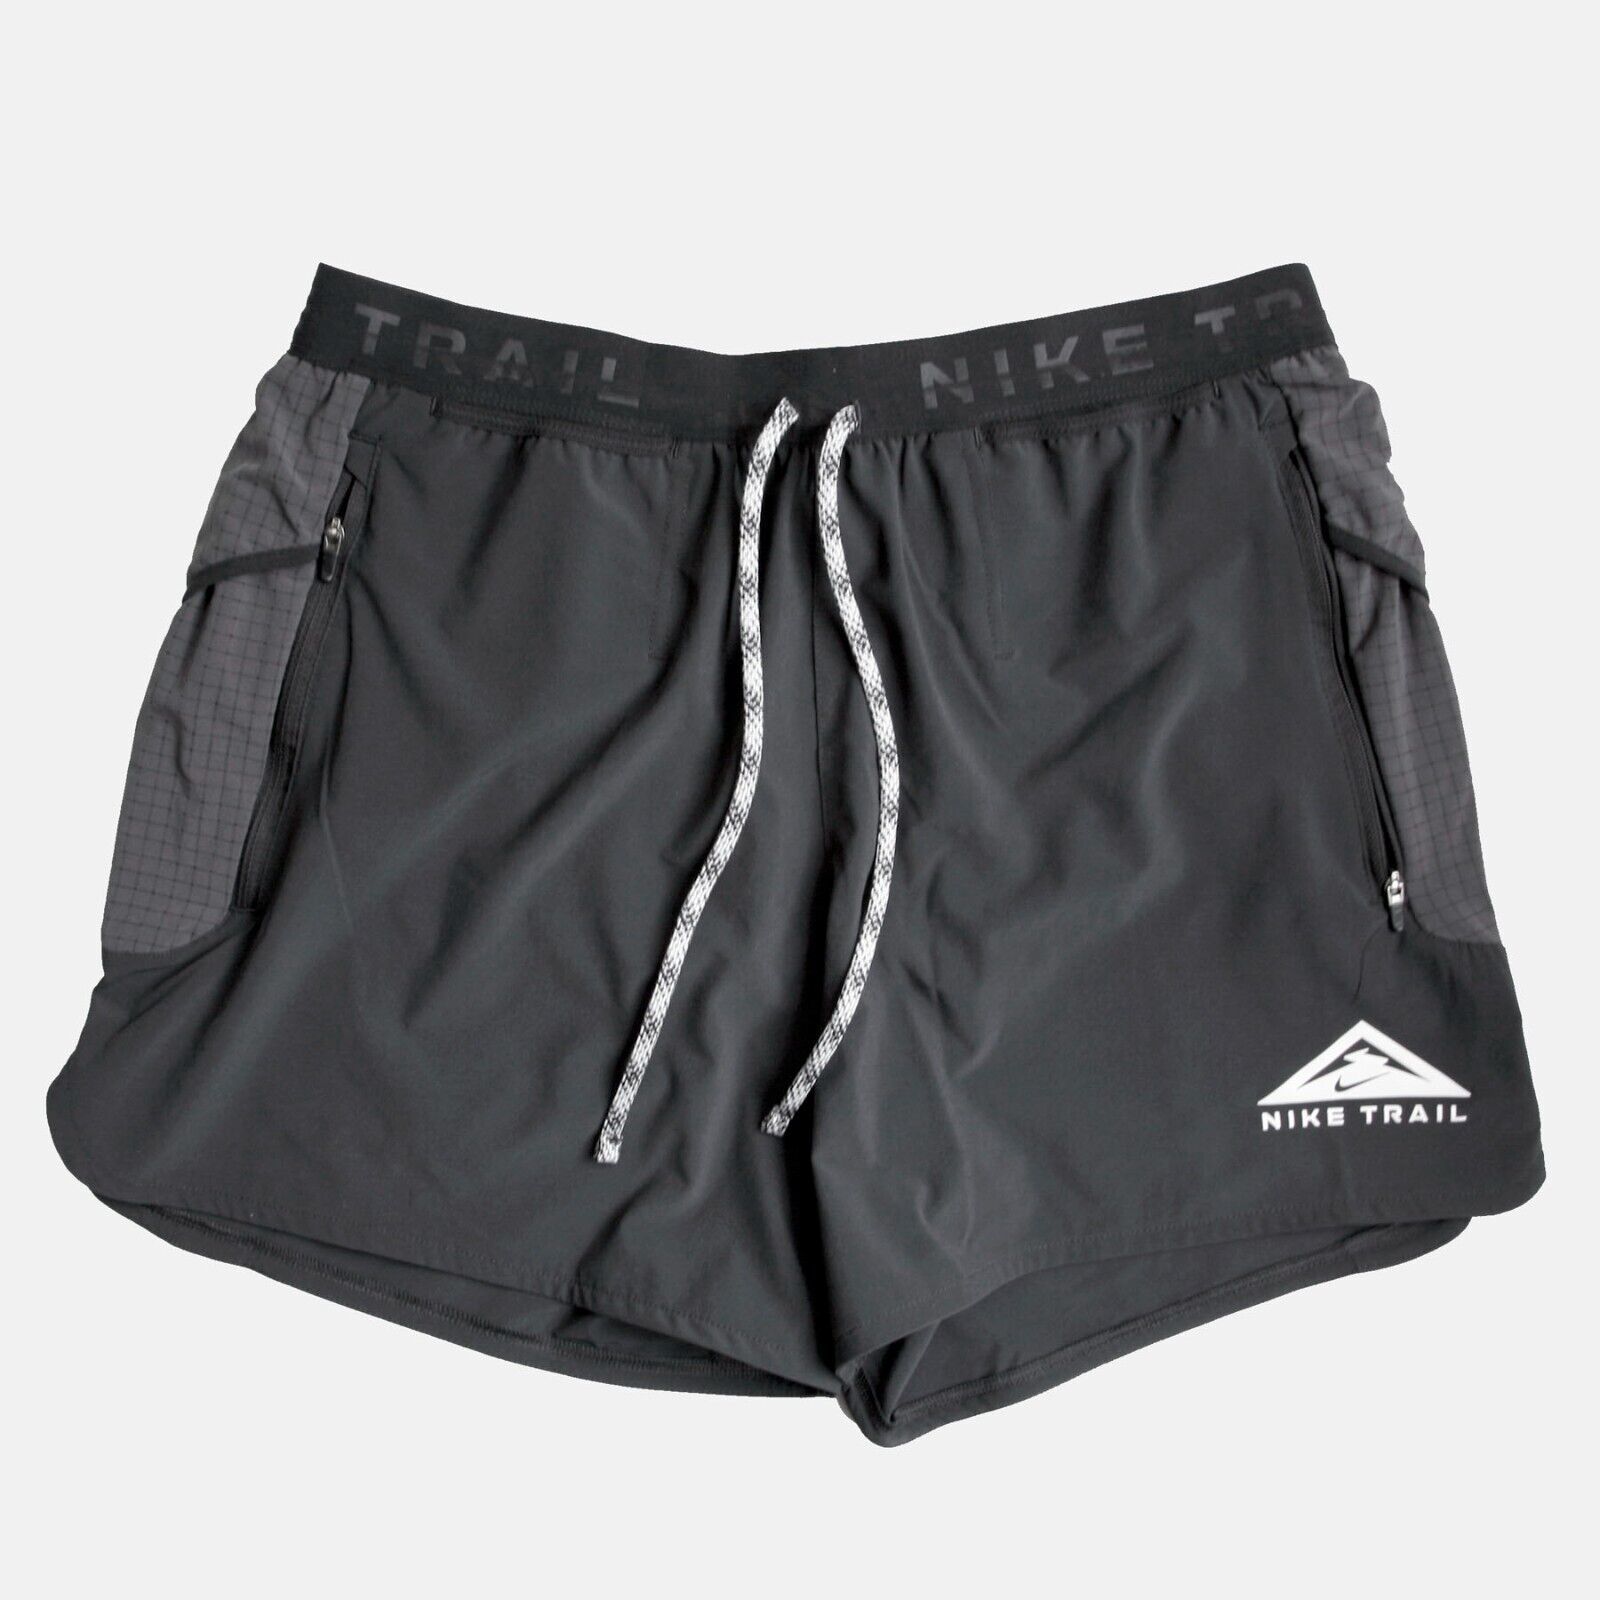 Primary image for Nike Trail Second Sunrise Men's Dri-FIT 5" Brief-Lined Running Shorts Black Sz M